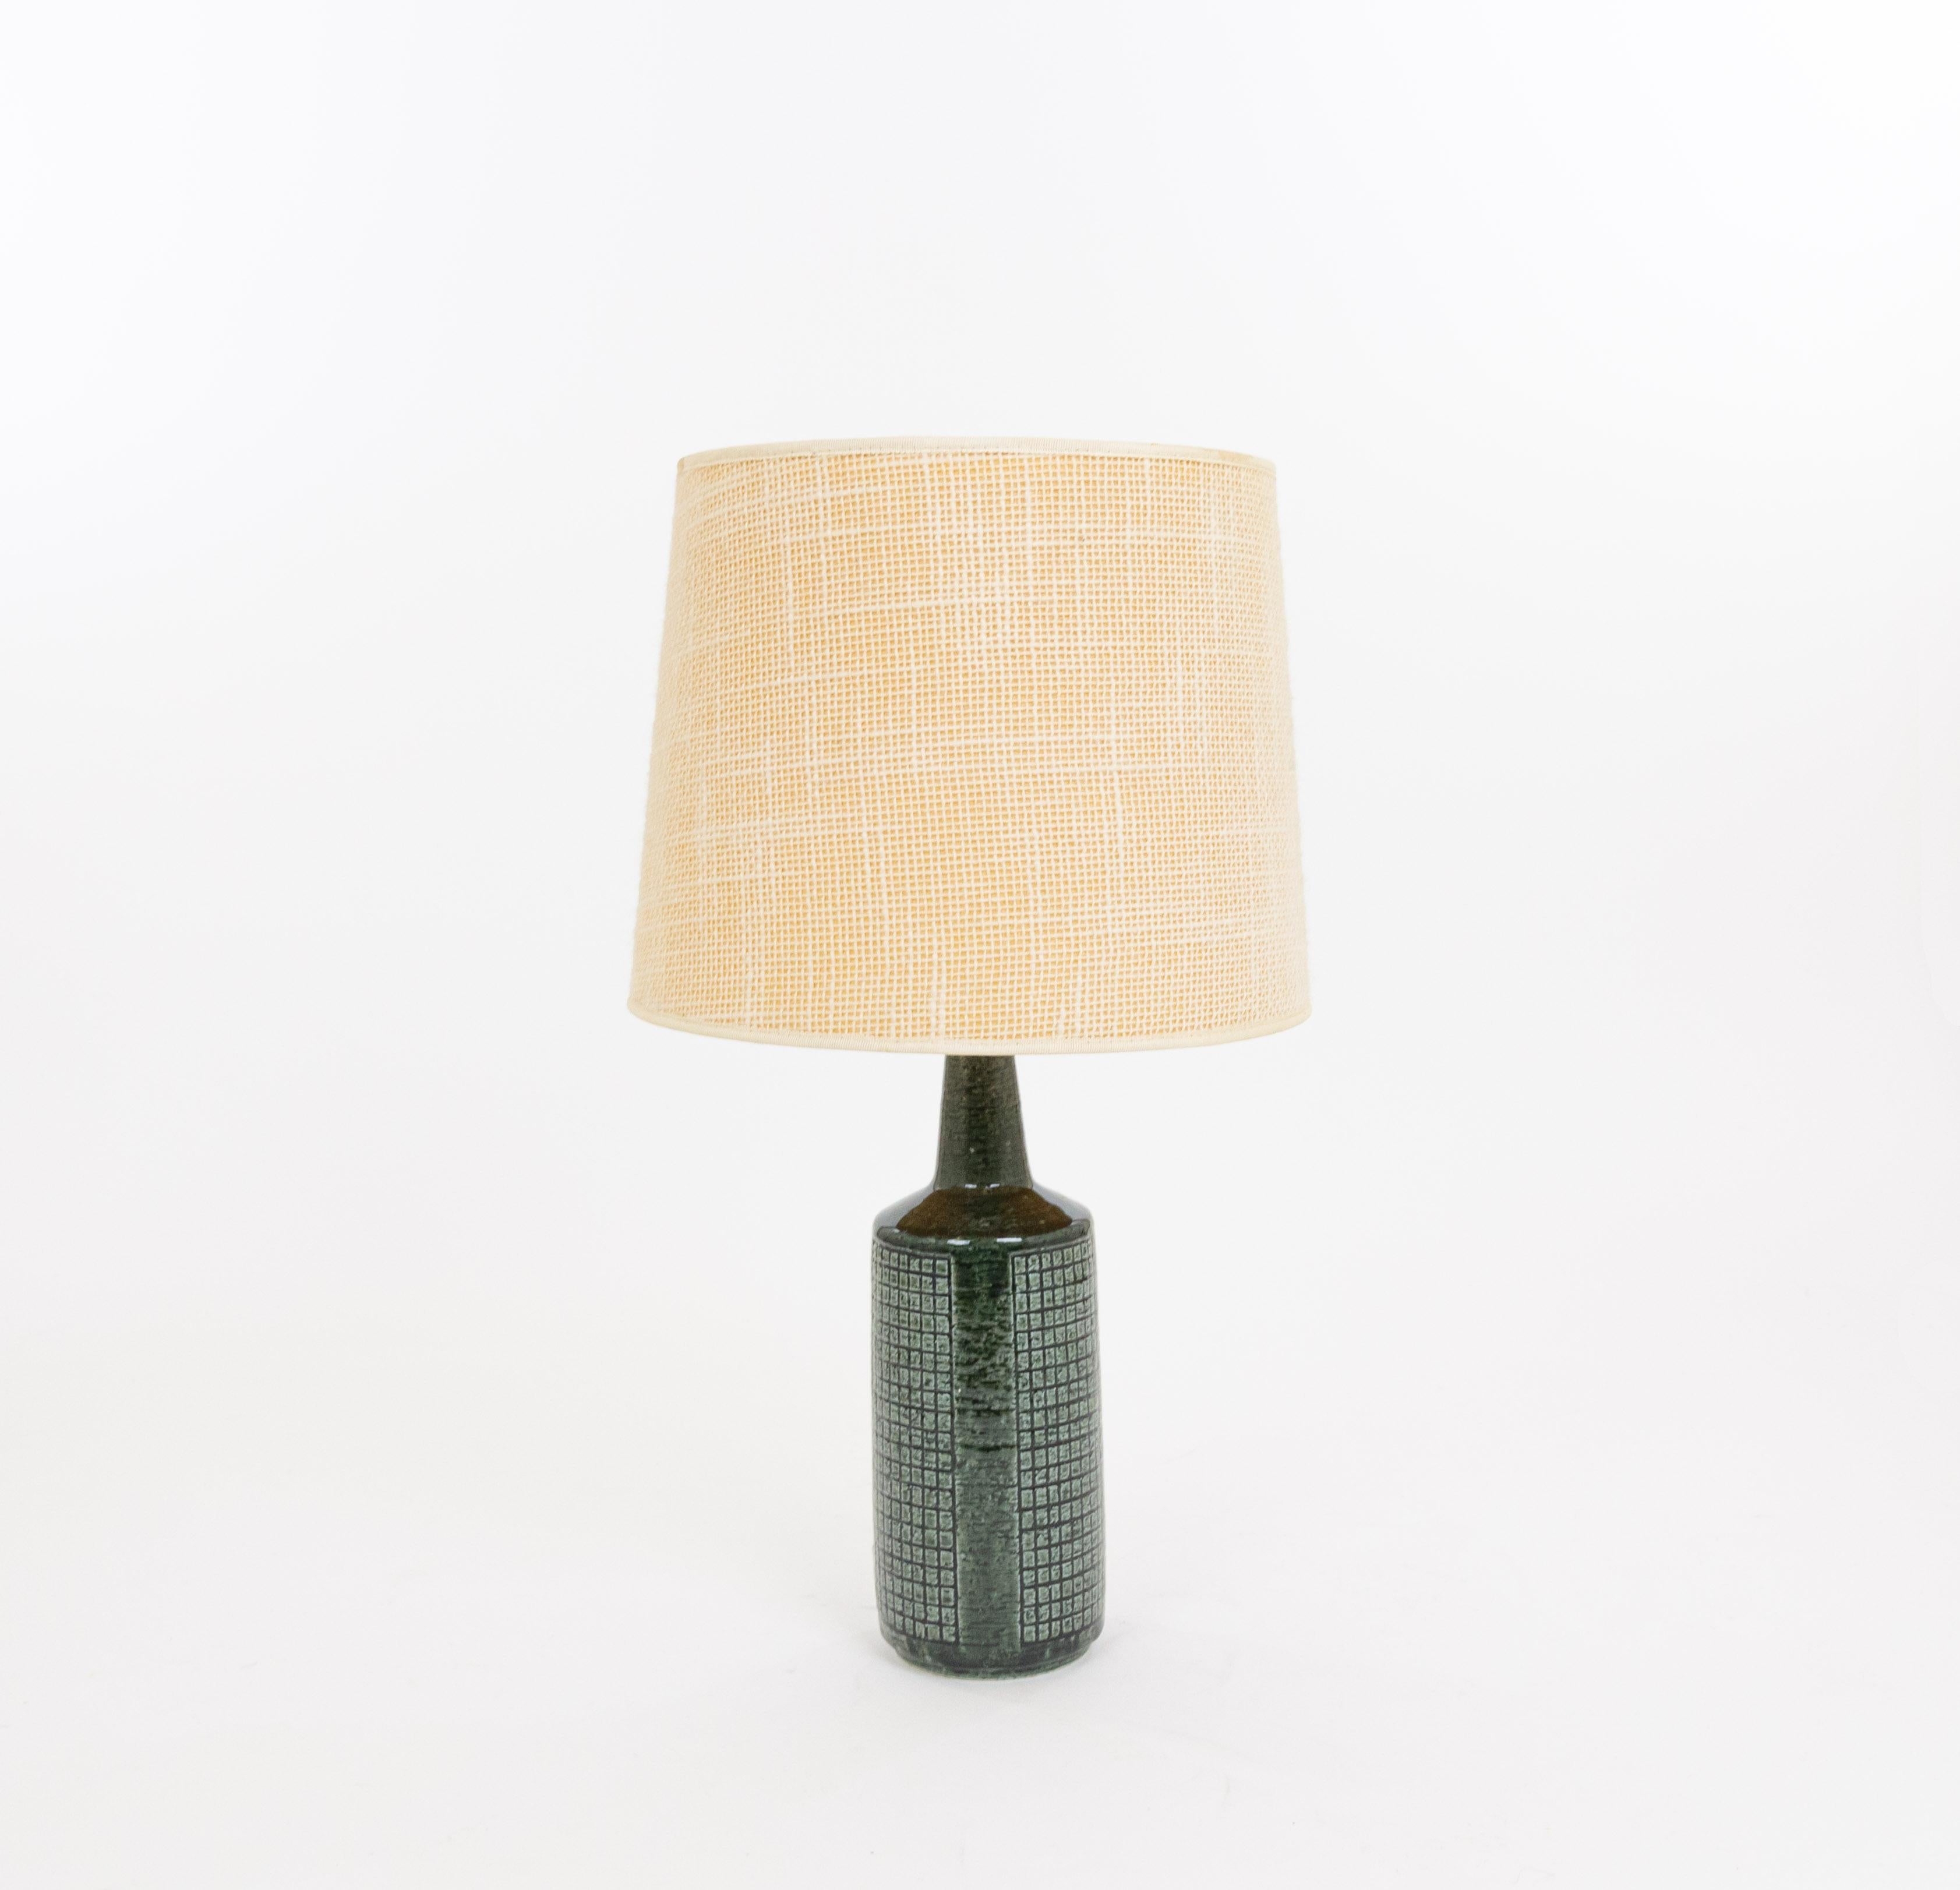 Model DL/30 table lamp made by Annelise and Per Linnemann-Schmidt for Palshus in the 1960s. The colour of the handmade decorated base is Bottle Green. It has impressed, geometric patterns.

The lamp comes with its original lampshade holder. The